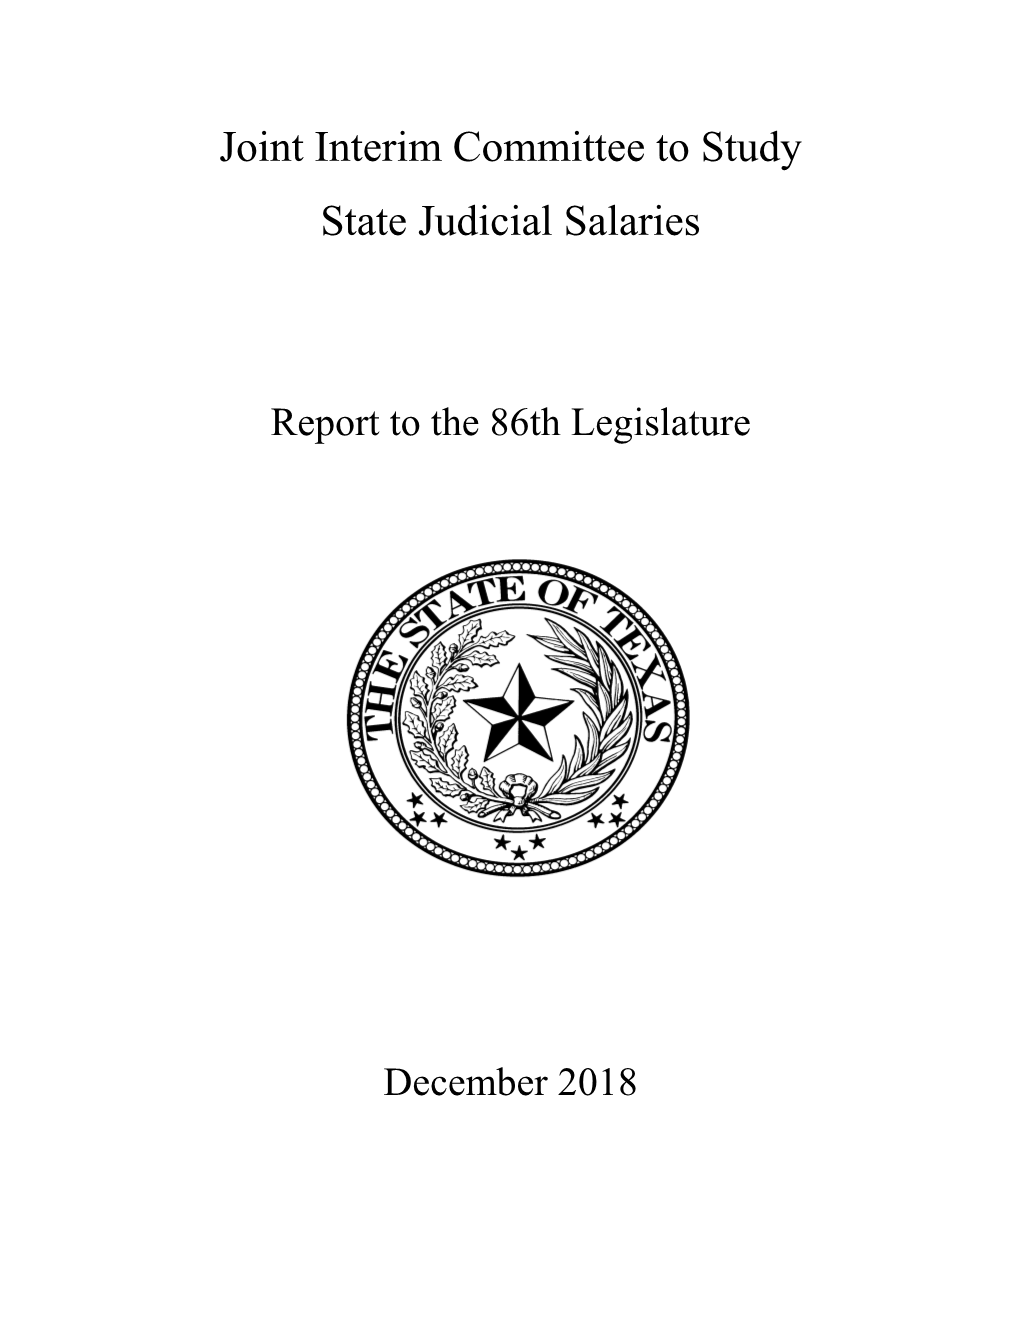 Joint Interim Committee to Study State Judicial Salaries